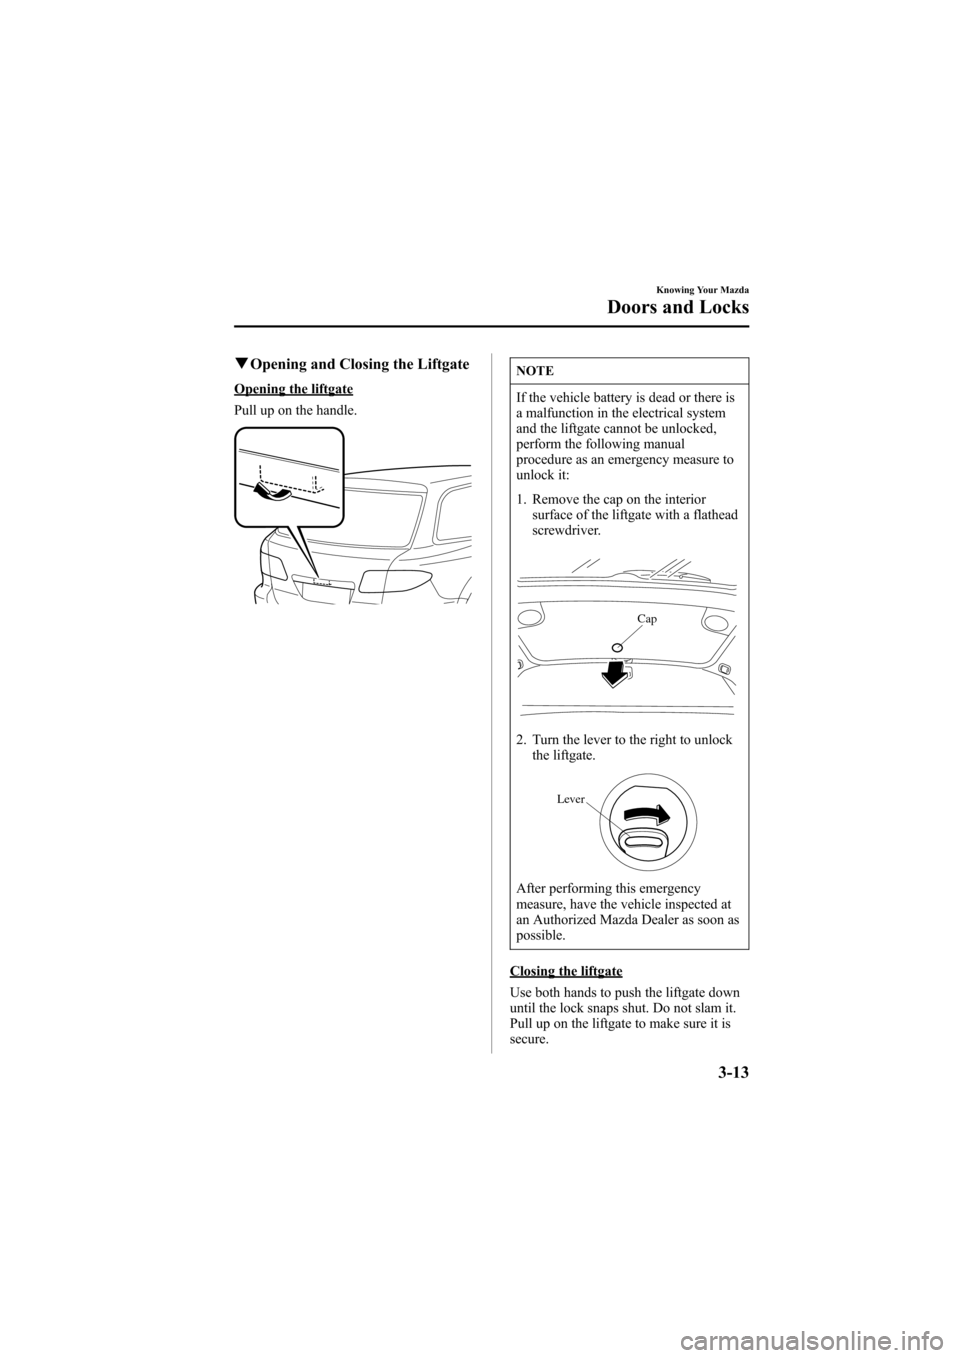 MAZDA MODEL 6 2005  Owners Manual (in English) Black plate (89,1)
qOpening and Closing the Liftgate
Opening the liftgate
Pull up on the handle.
NOTE
If the vehicle battery is dead or there is
a malfunction in the electrical system
and the liftgate